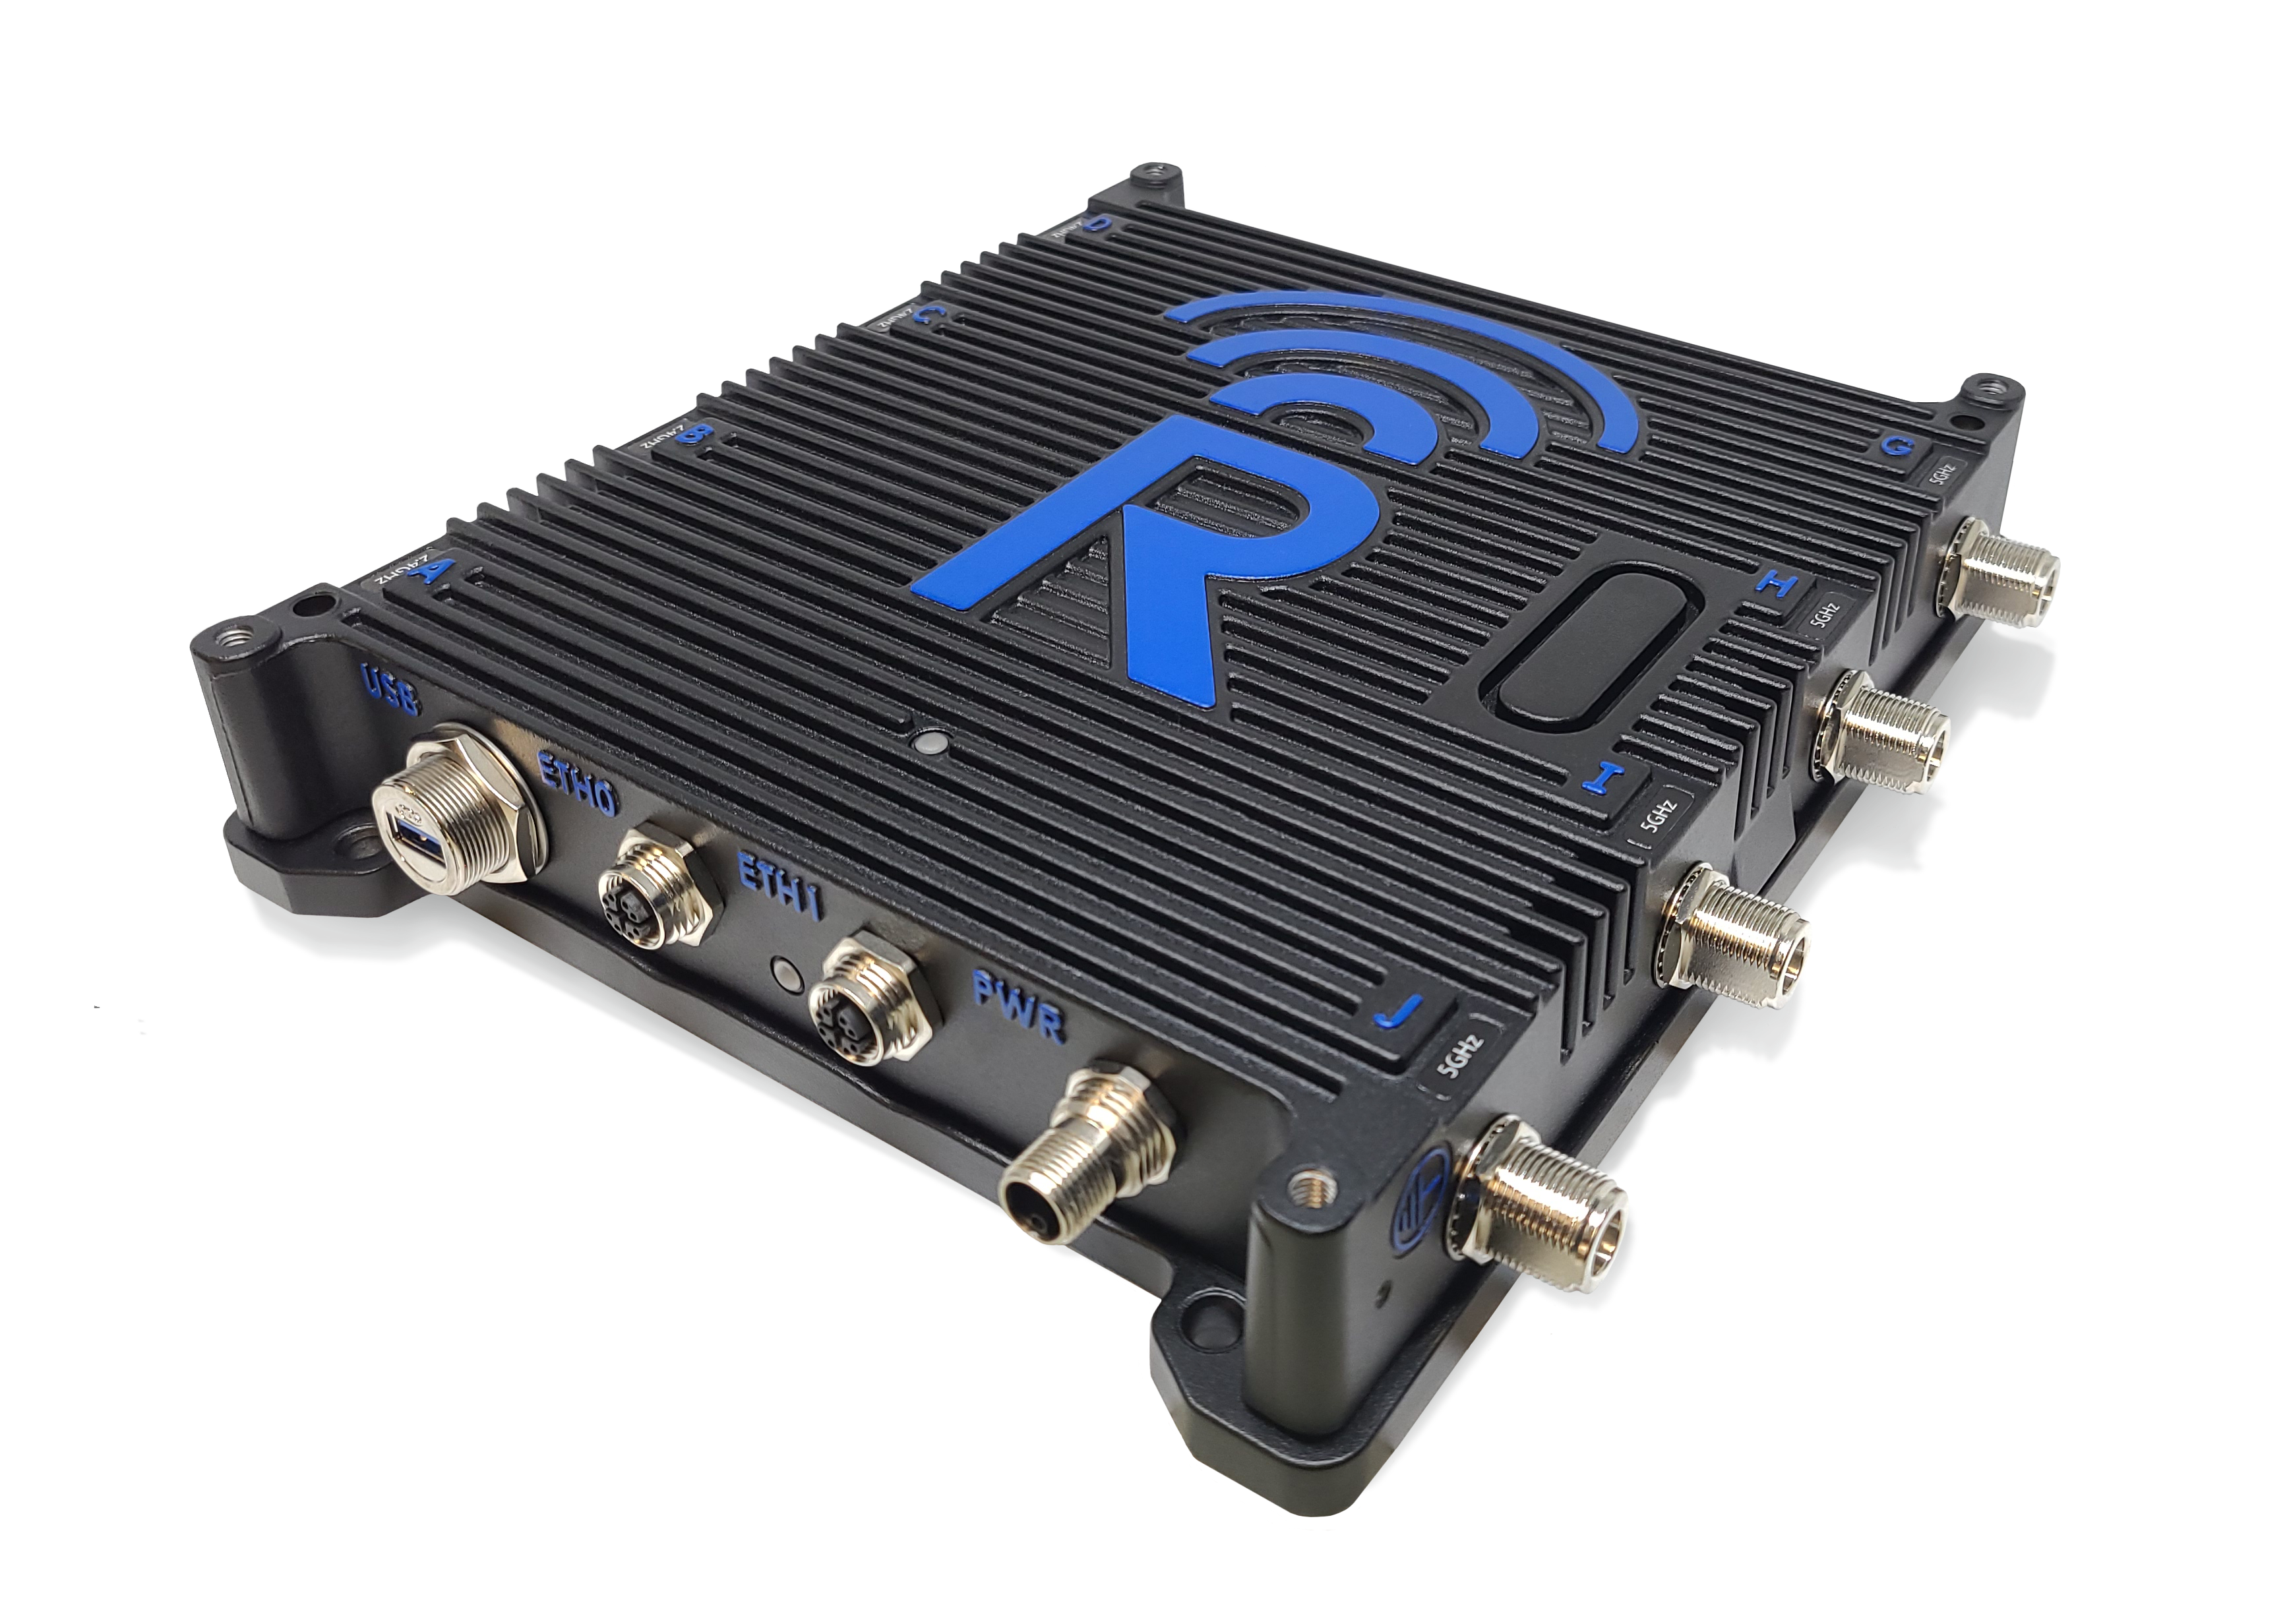 The Peregrine LTE is Rajant’s high-performance BreadCrumb equipped with LTE capabilities, allowing agile and reliable machine-to-machine and peer-to-peer communications.